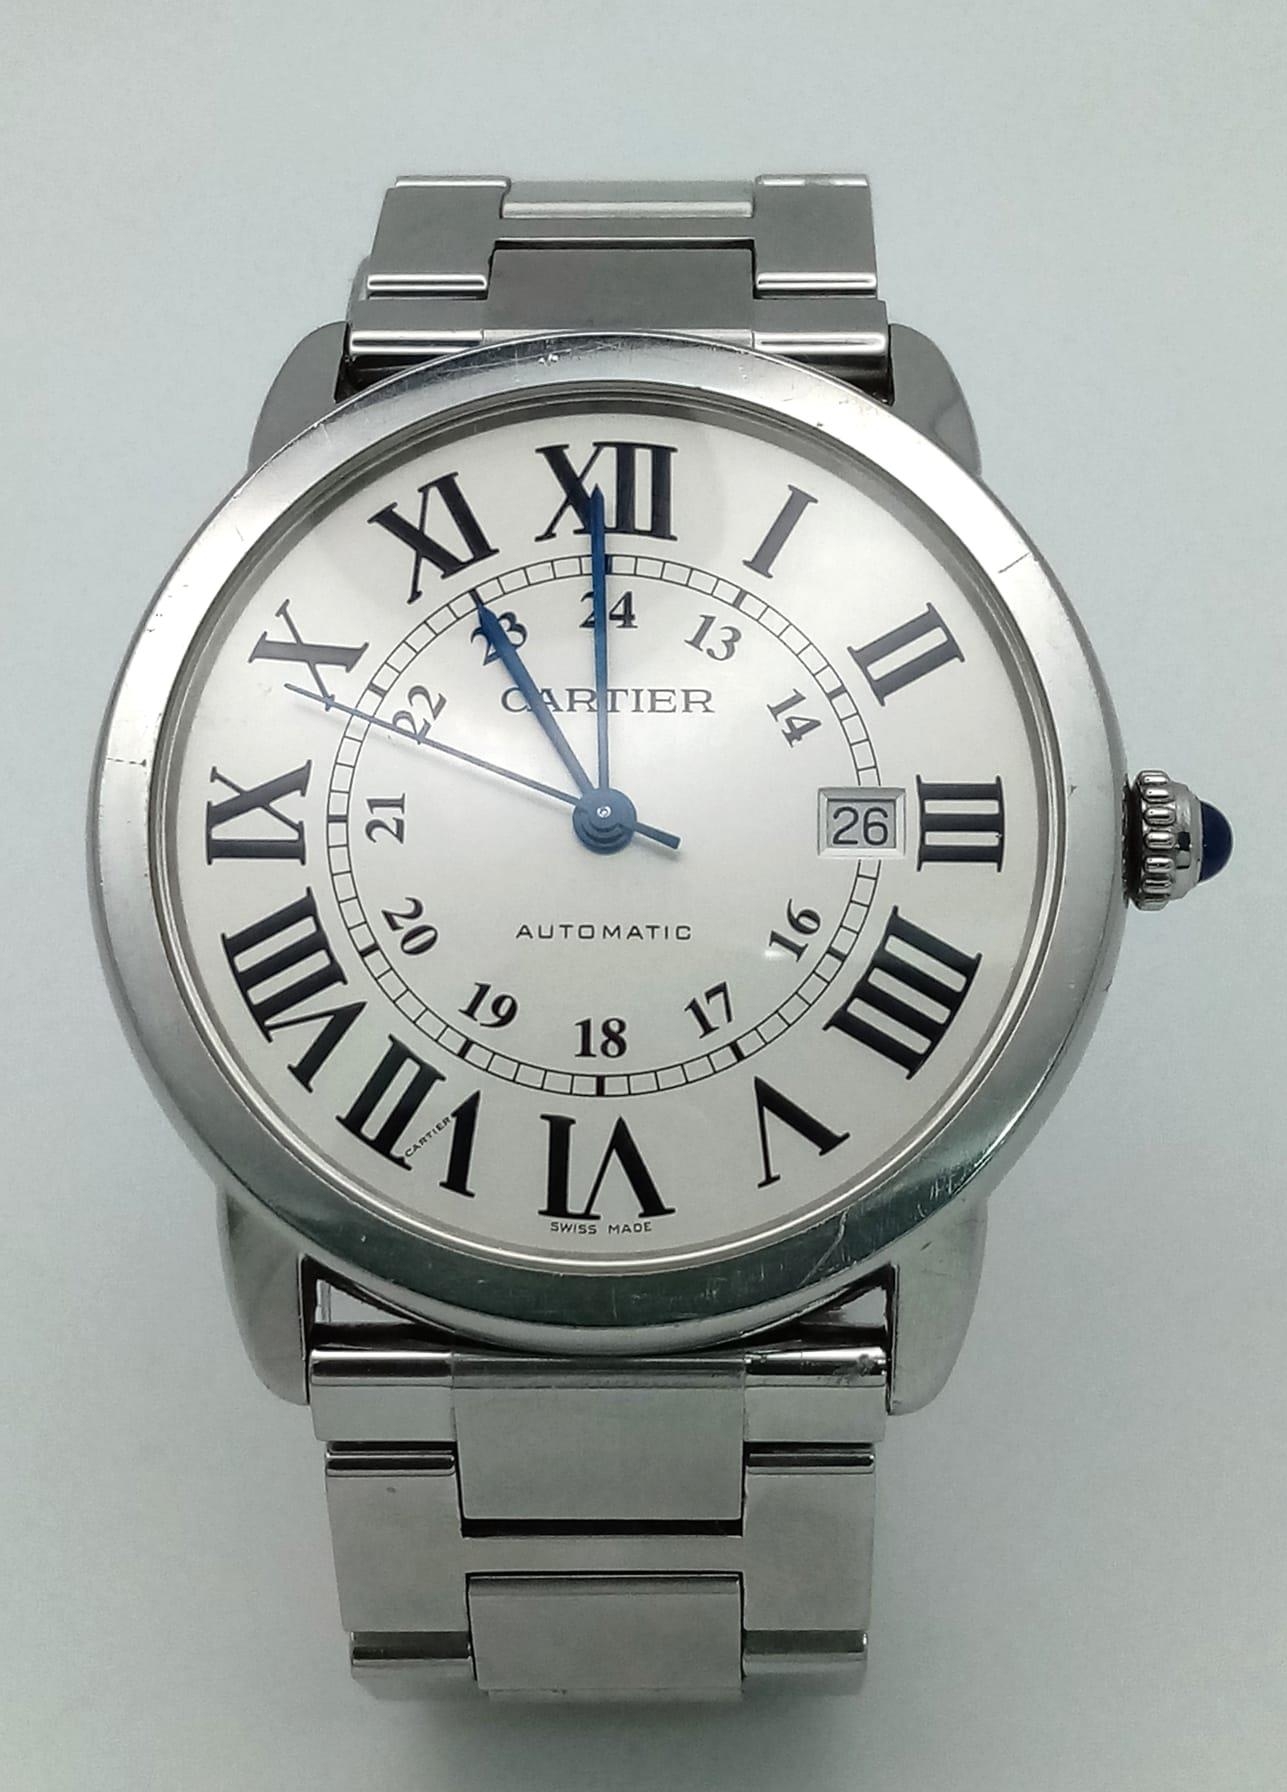 A CARTIER STAINLESS STEEL GENTS AUTOMATIC "RONDE SOLO" WATCH WITH BOX AND PAPERS 42mm 14808 - Image 2 of 10